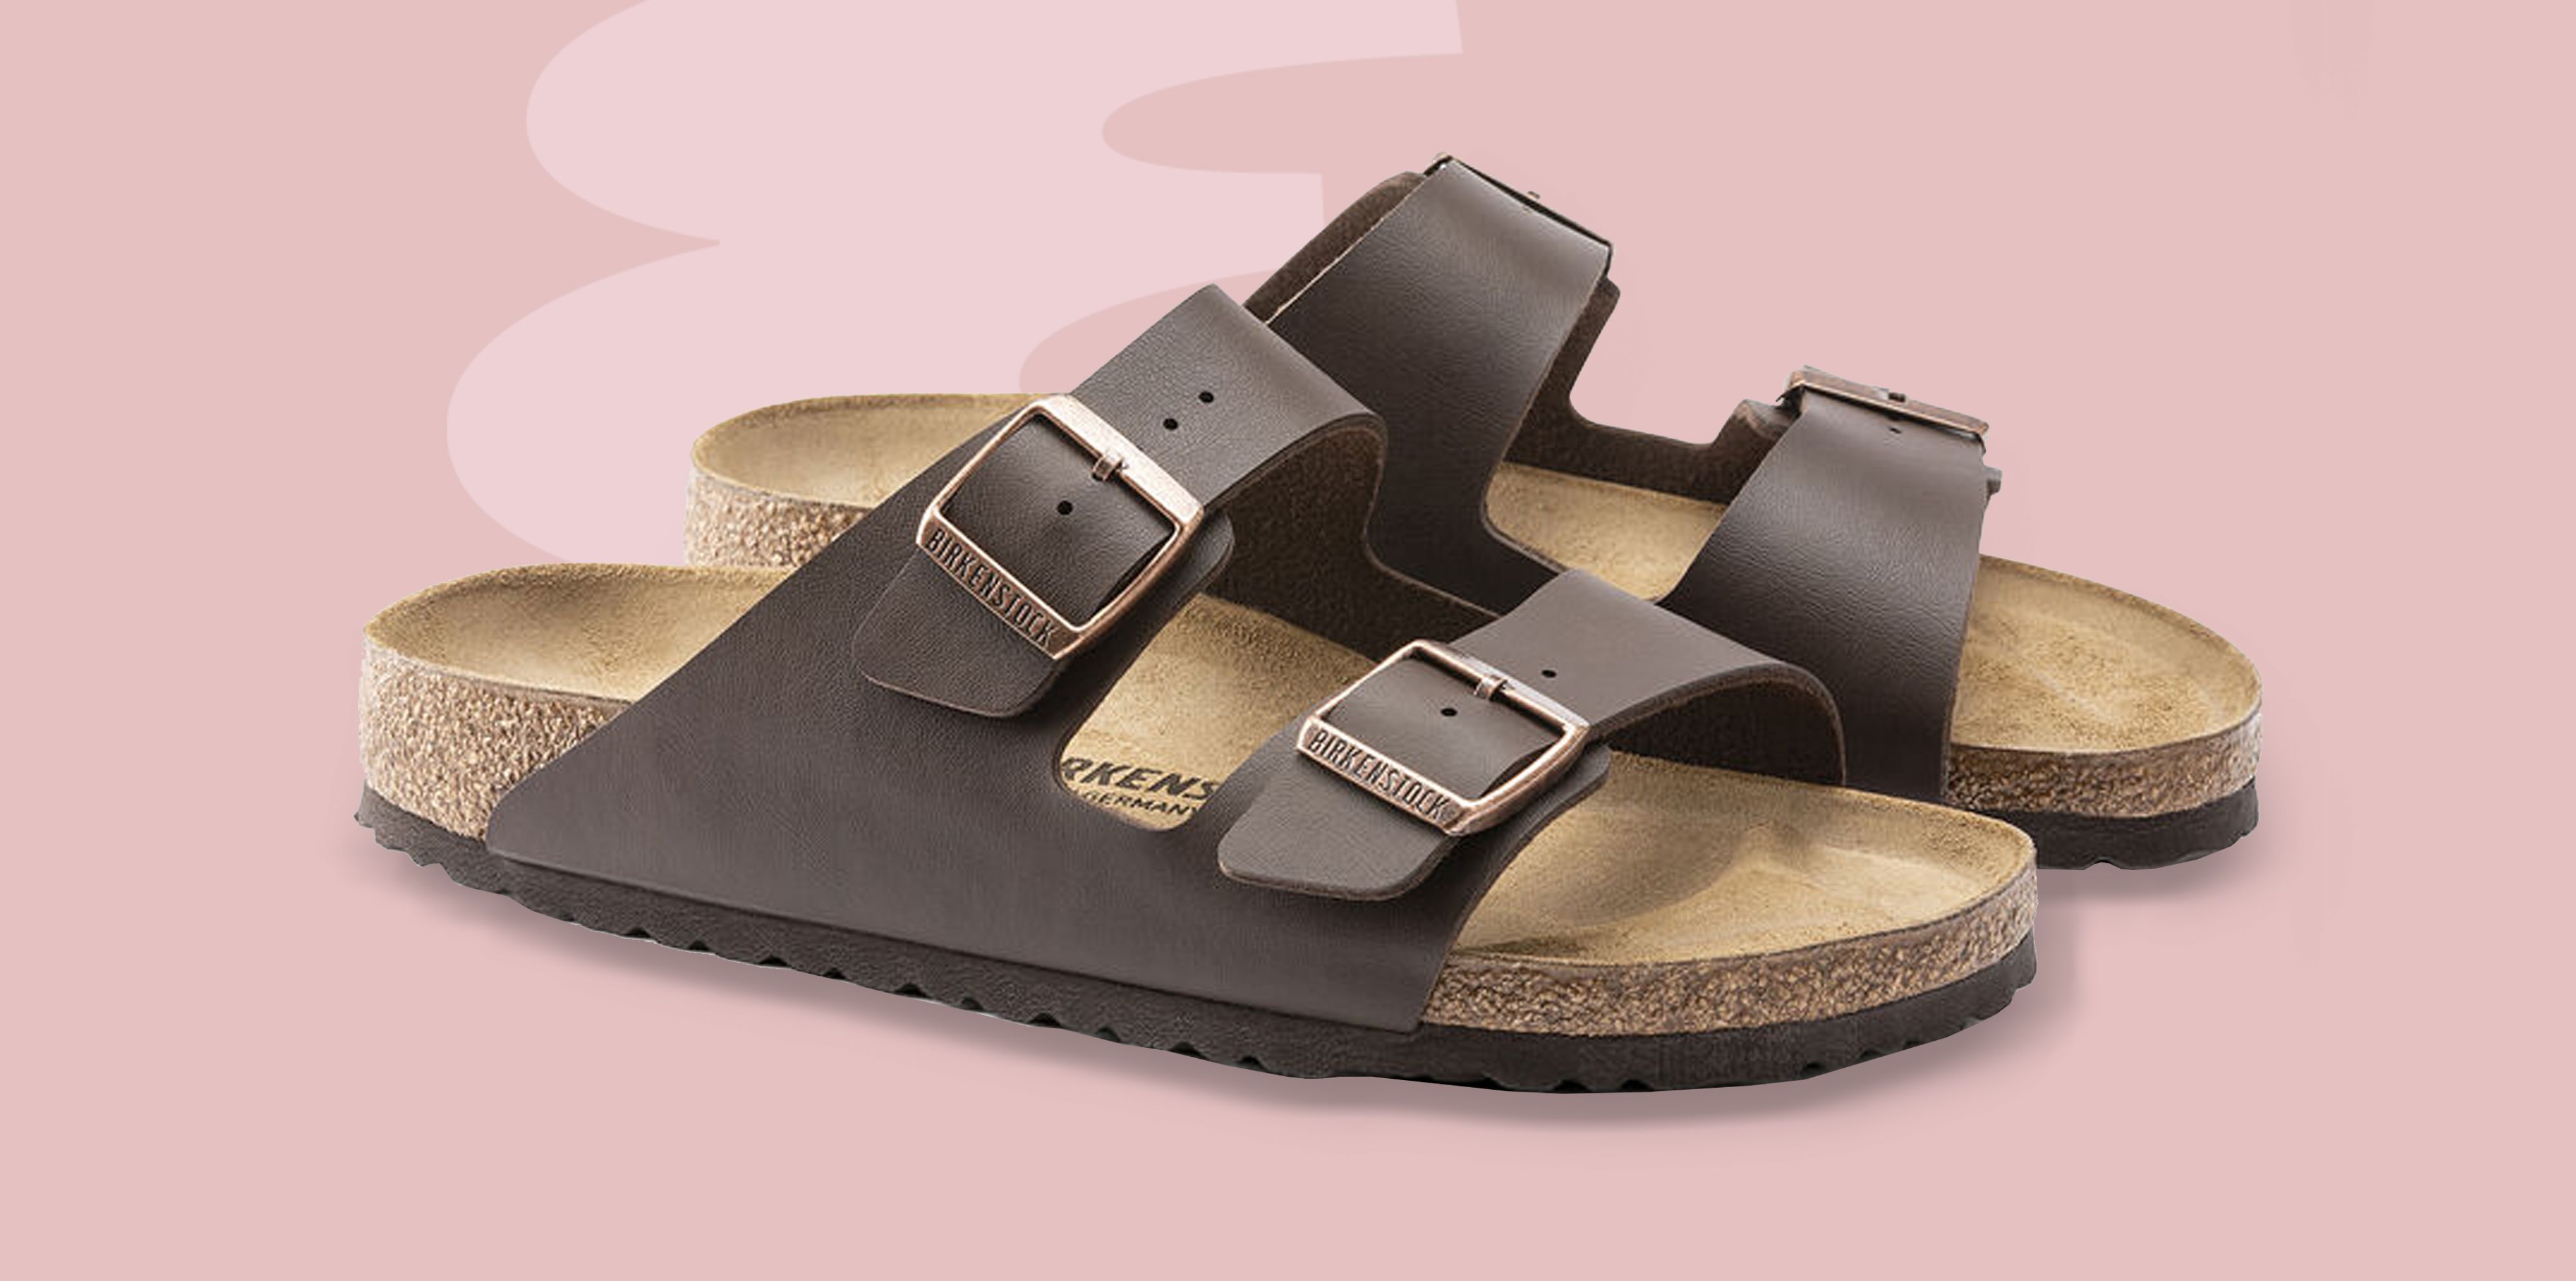 New Look - Spring is coming and we've got comfy new sandals that are worth  getting a pedicure for 🌸 http://bit.ly/2xa9anP | Facebook